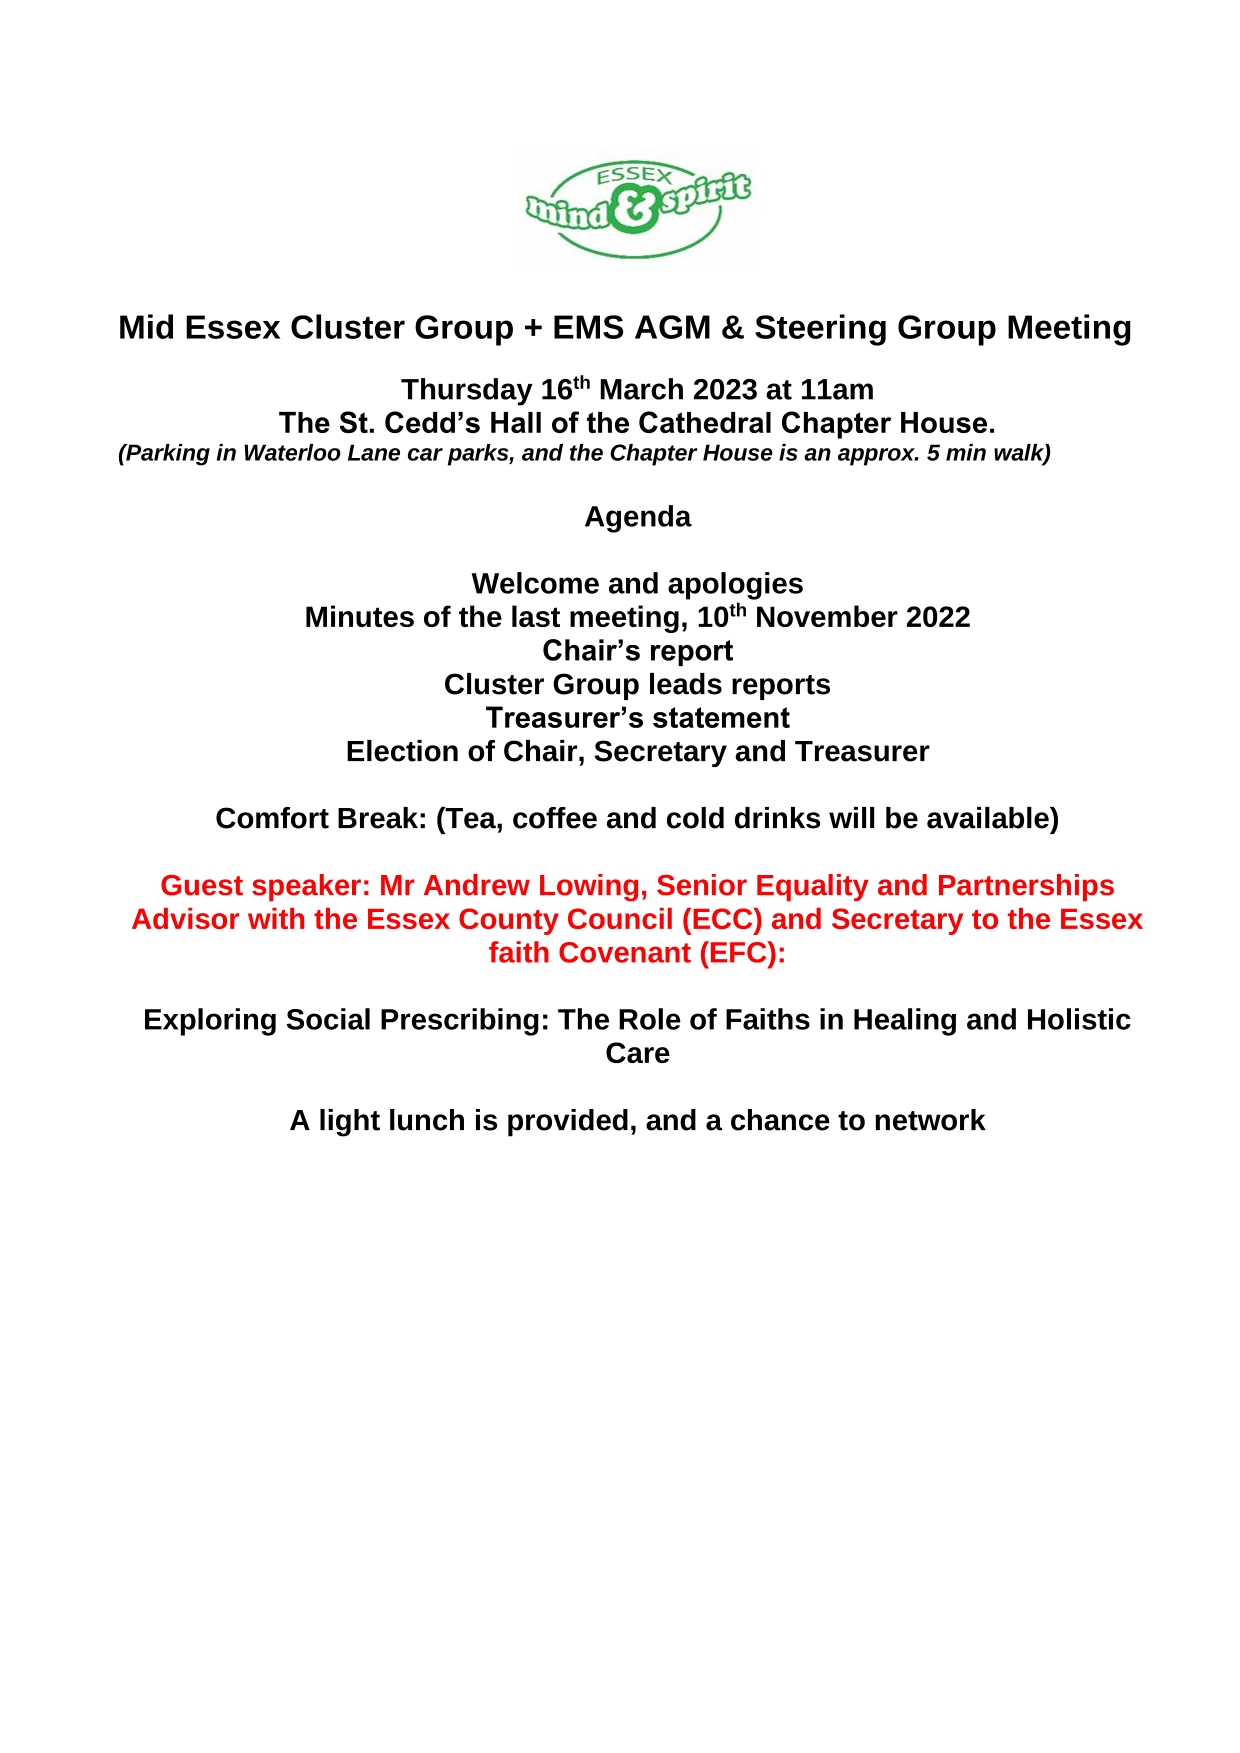 Agenda for EMS event 16th March 2023